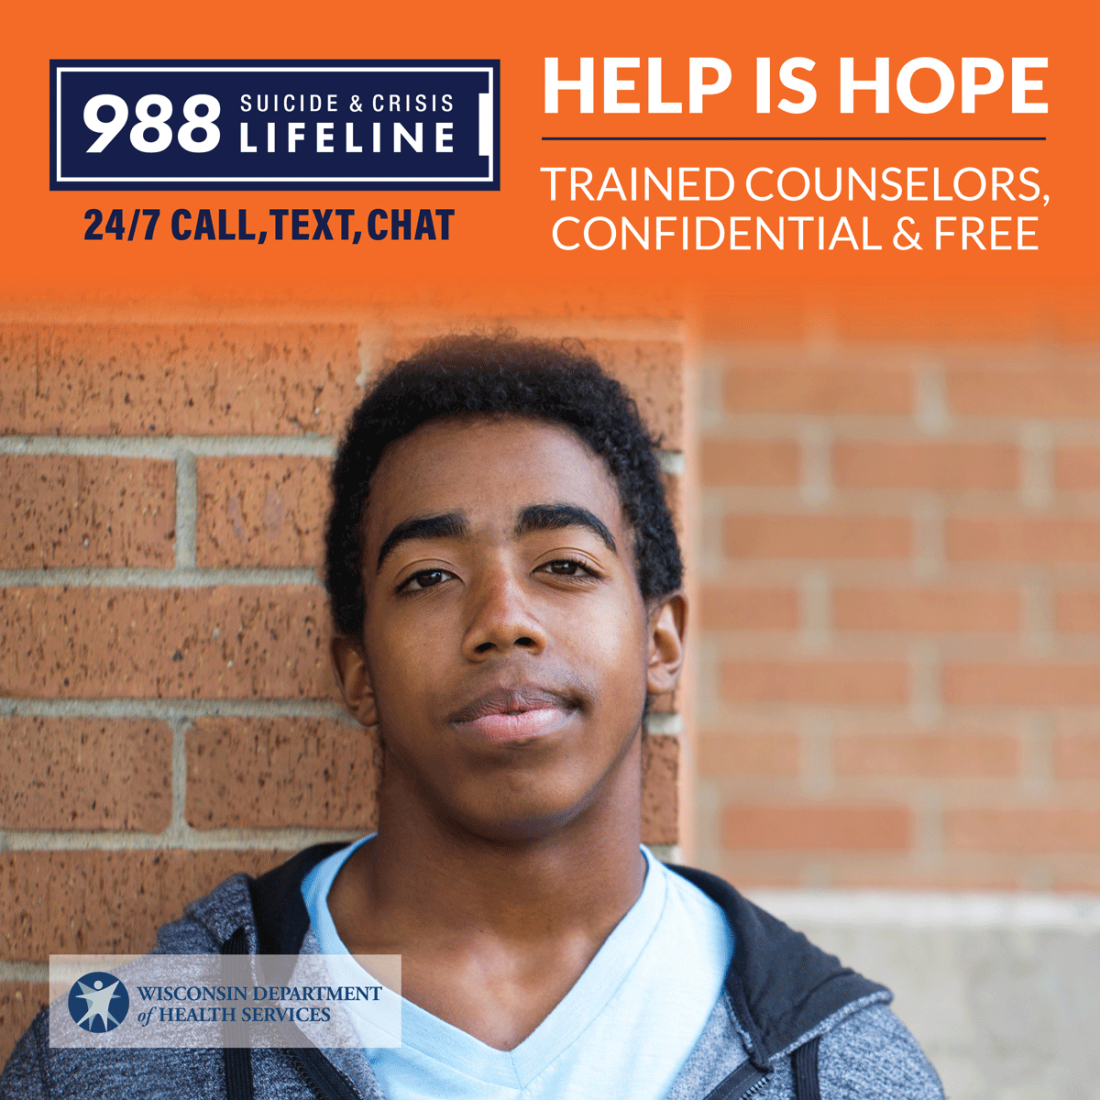 Youth - Help is hope - 988 Suicide & Crisis Lifeline